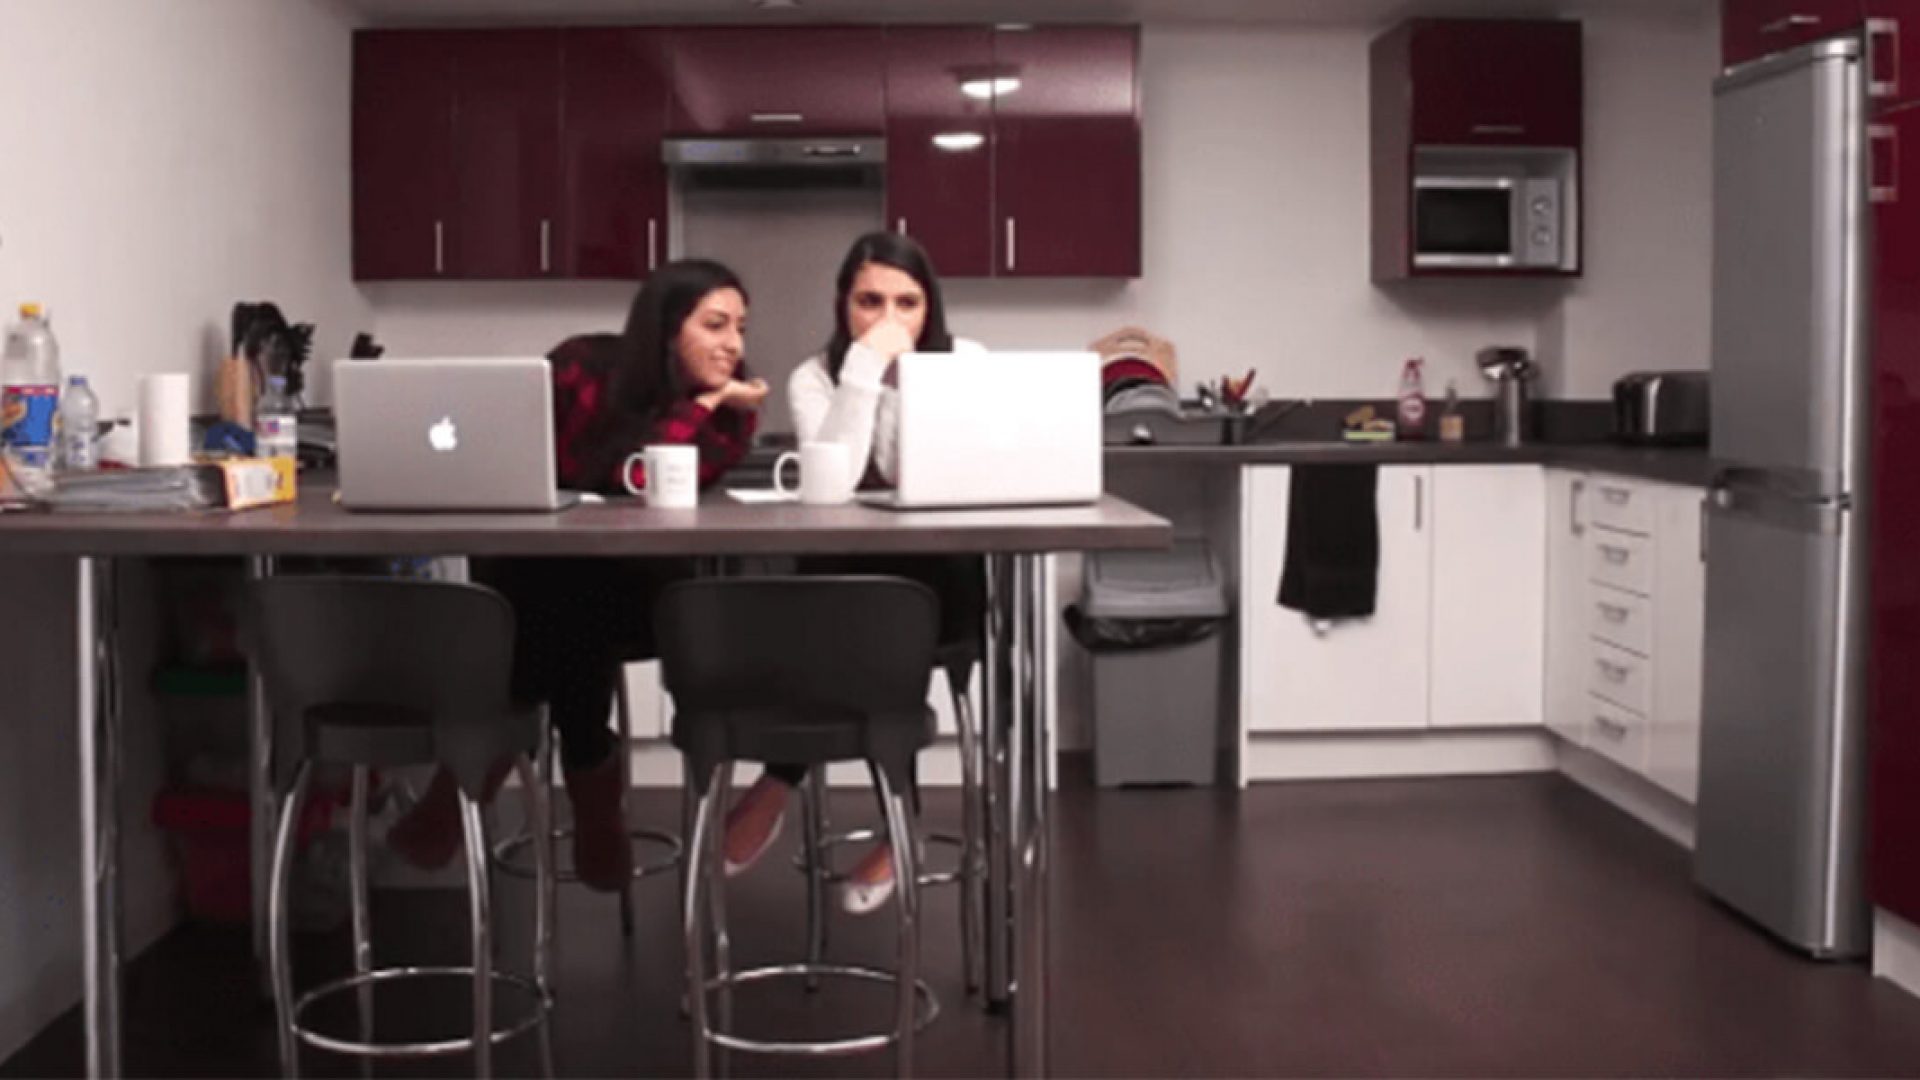 Sales Video For University Halls of Residence